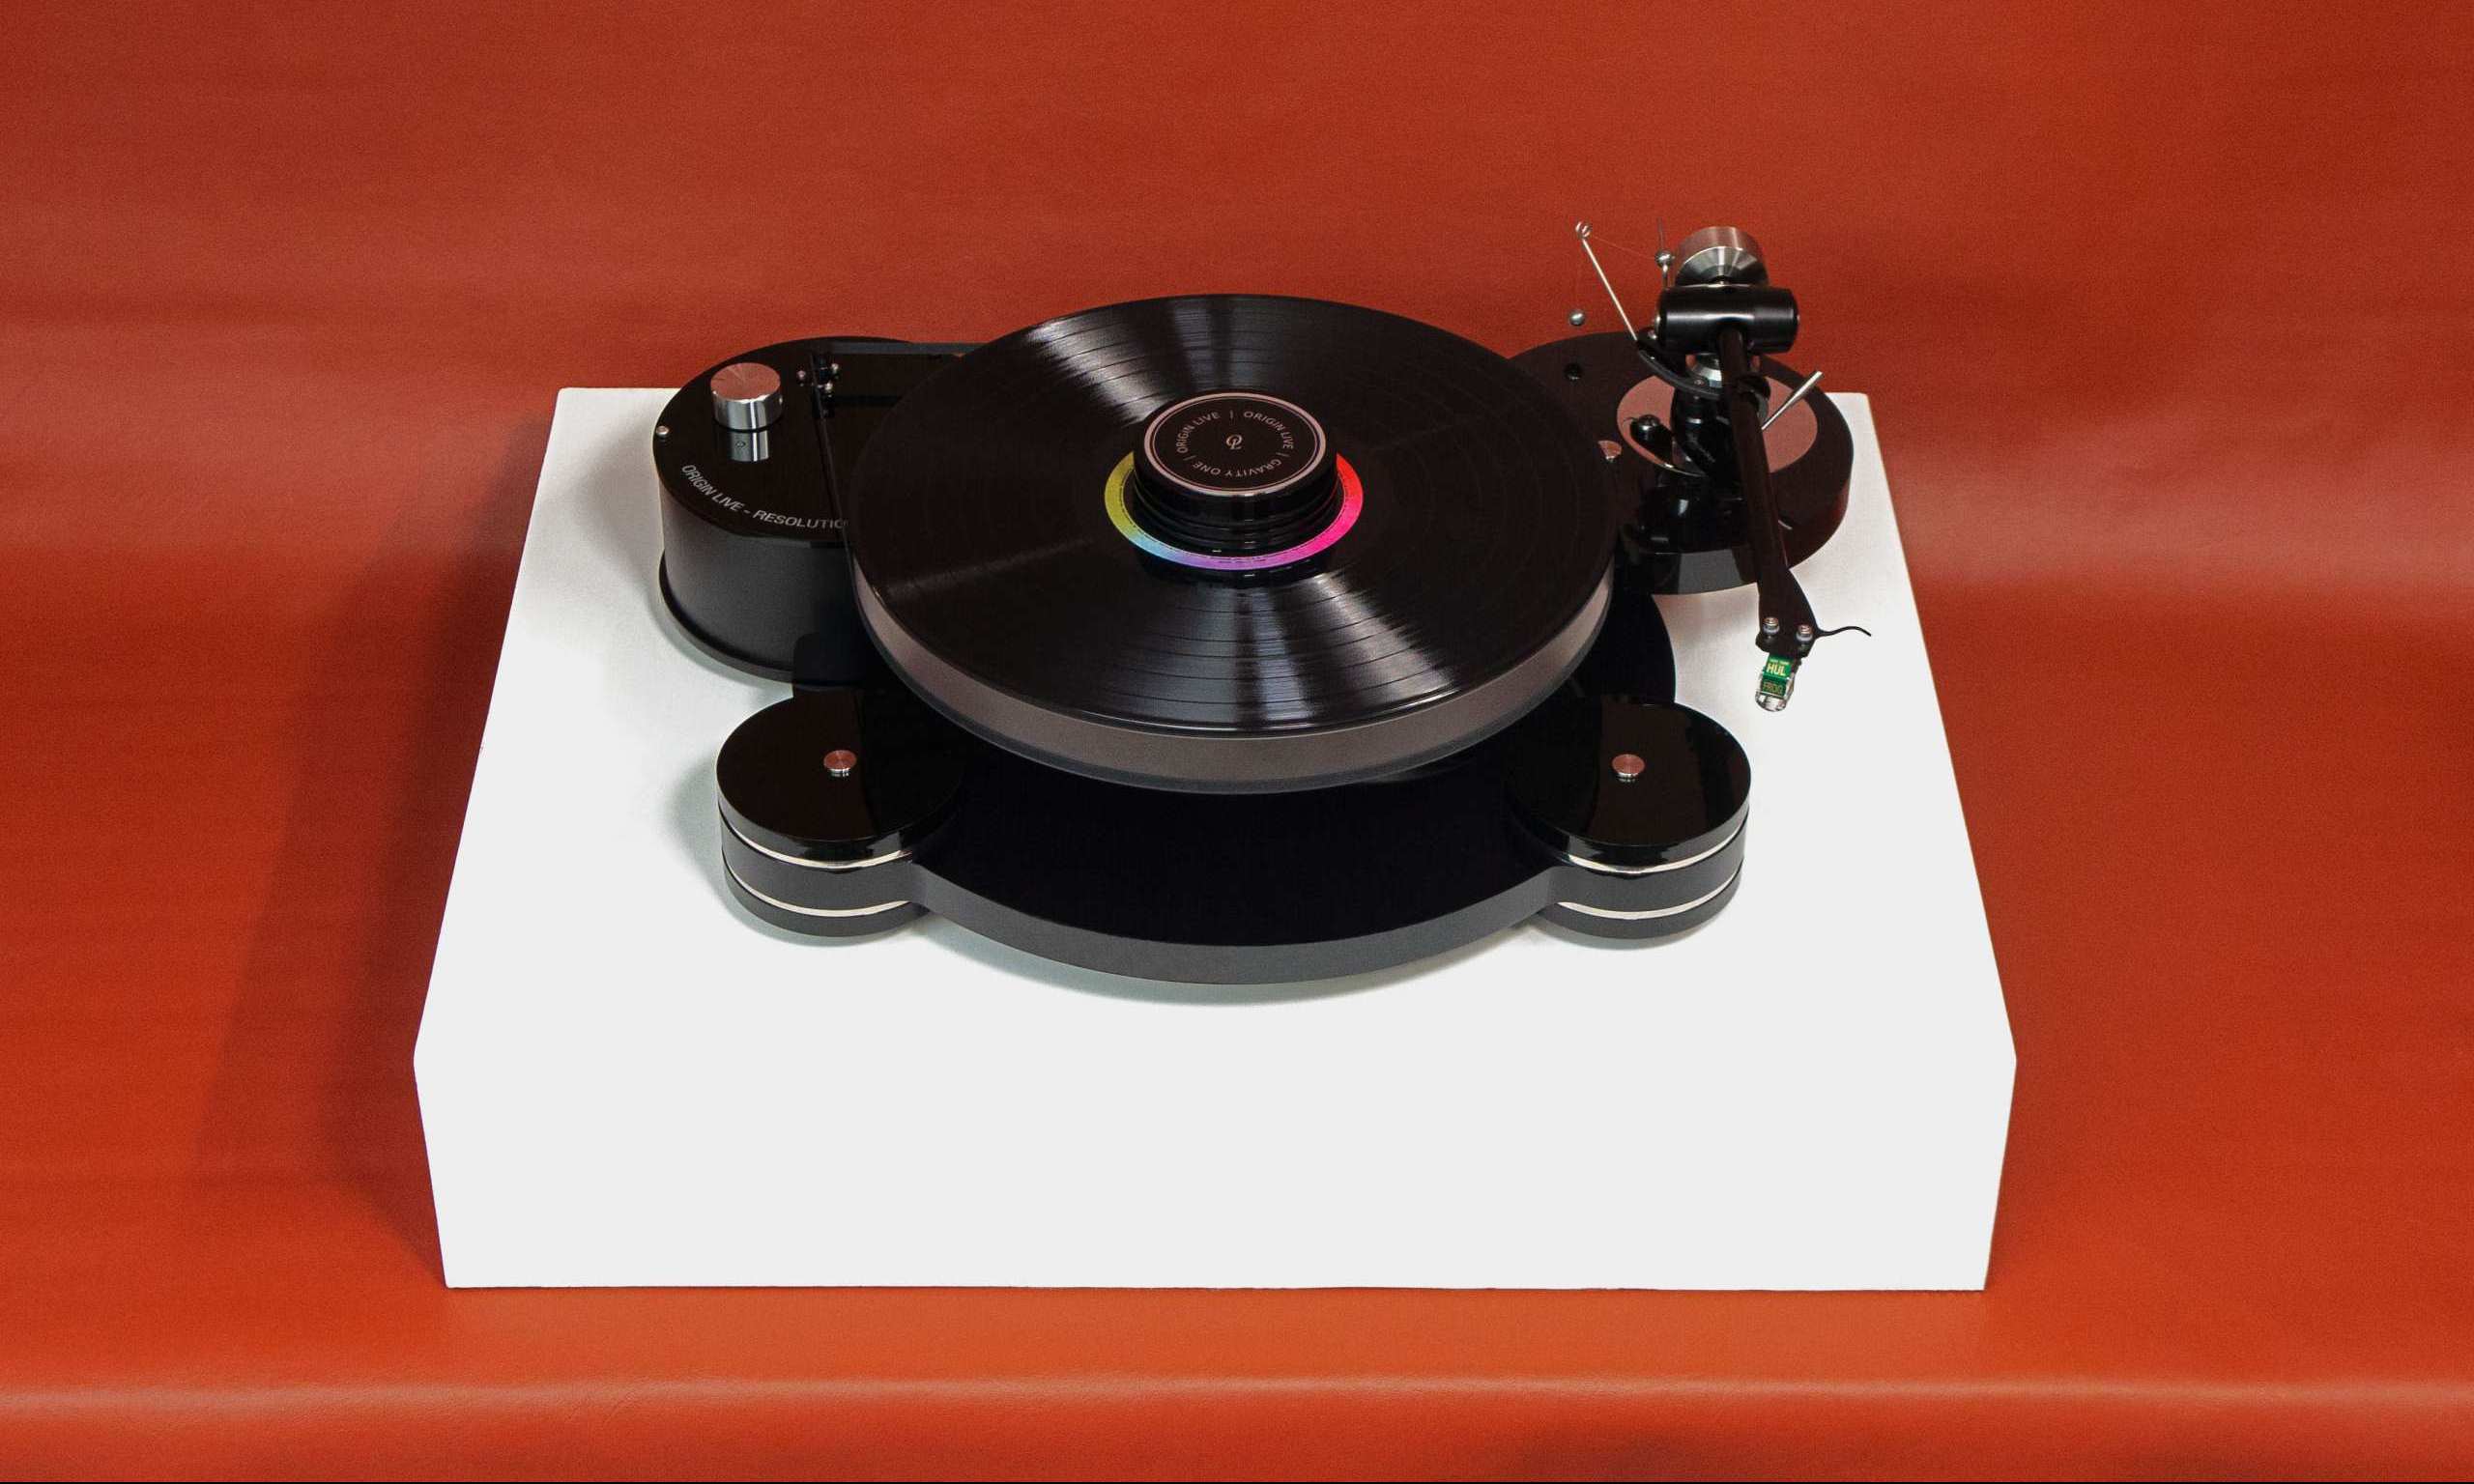 Origin Live Hi-Fi Resolution Turntable for analogue audio vinyl playback fitted with onyx tonearm and gravity one record weight